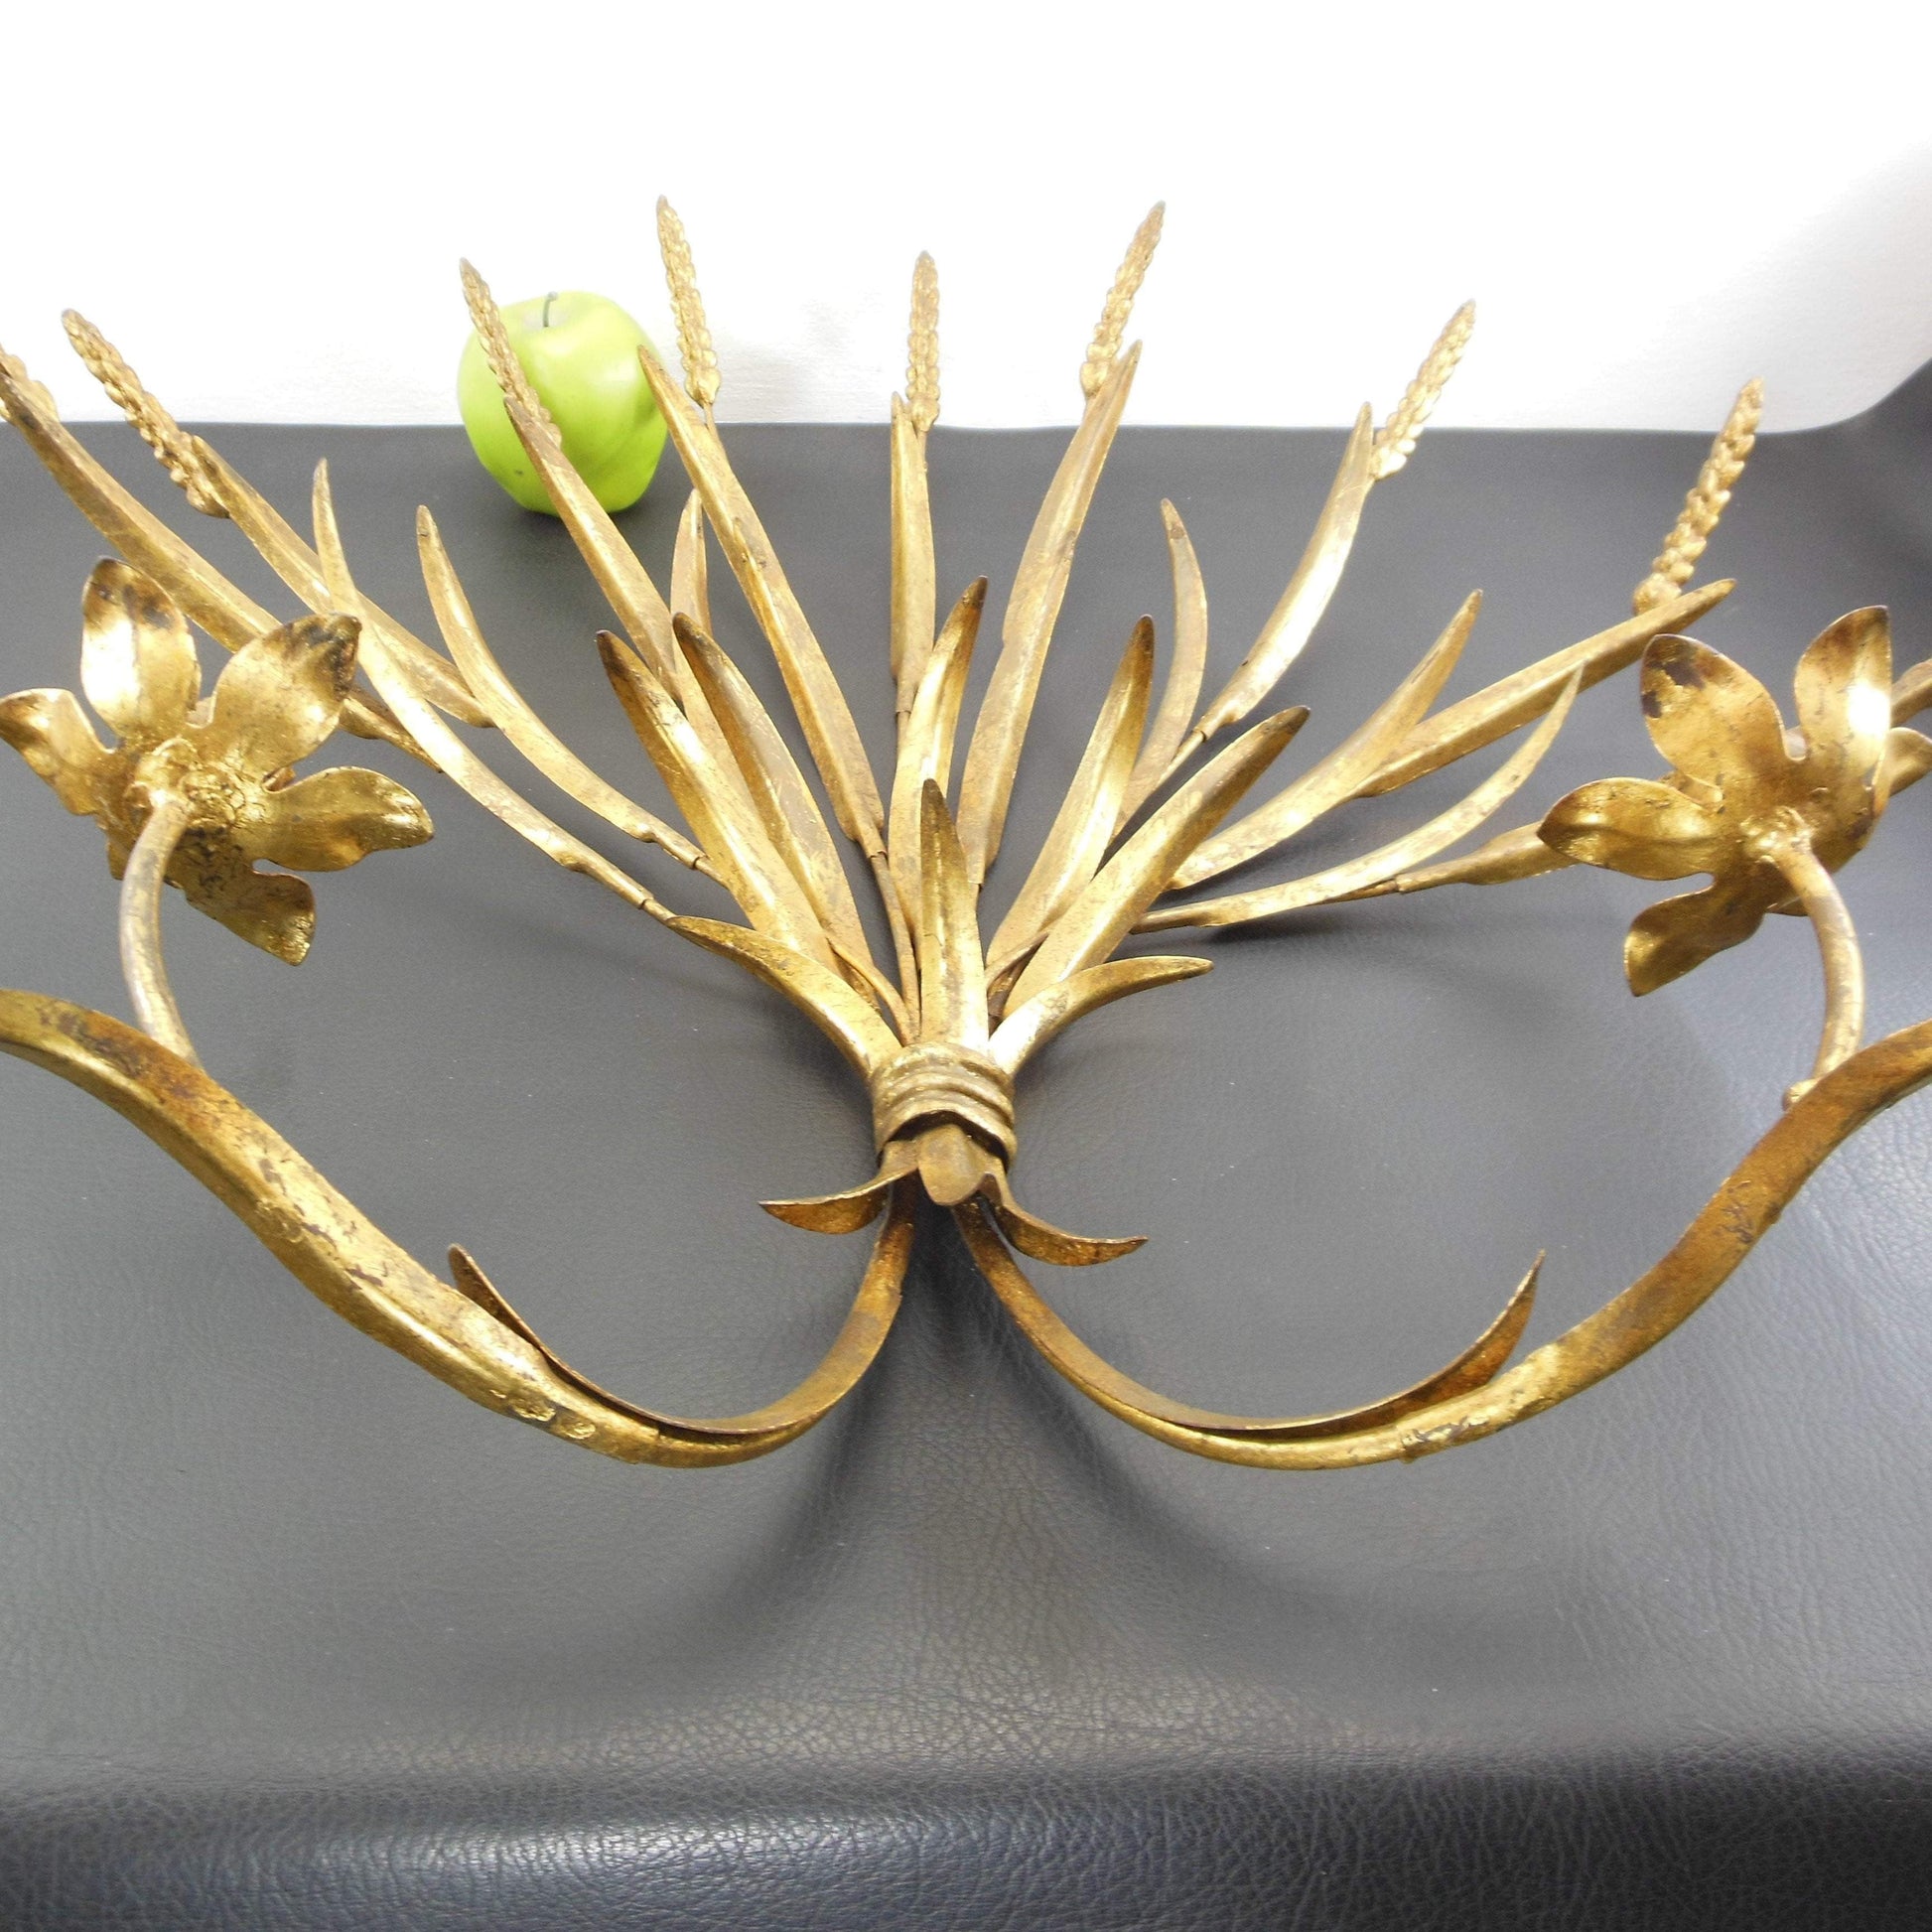 Italian Mid Century Gold Leaf Tole Wheat Flower Candle Sconce Vintage